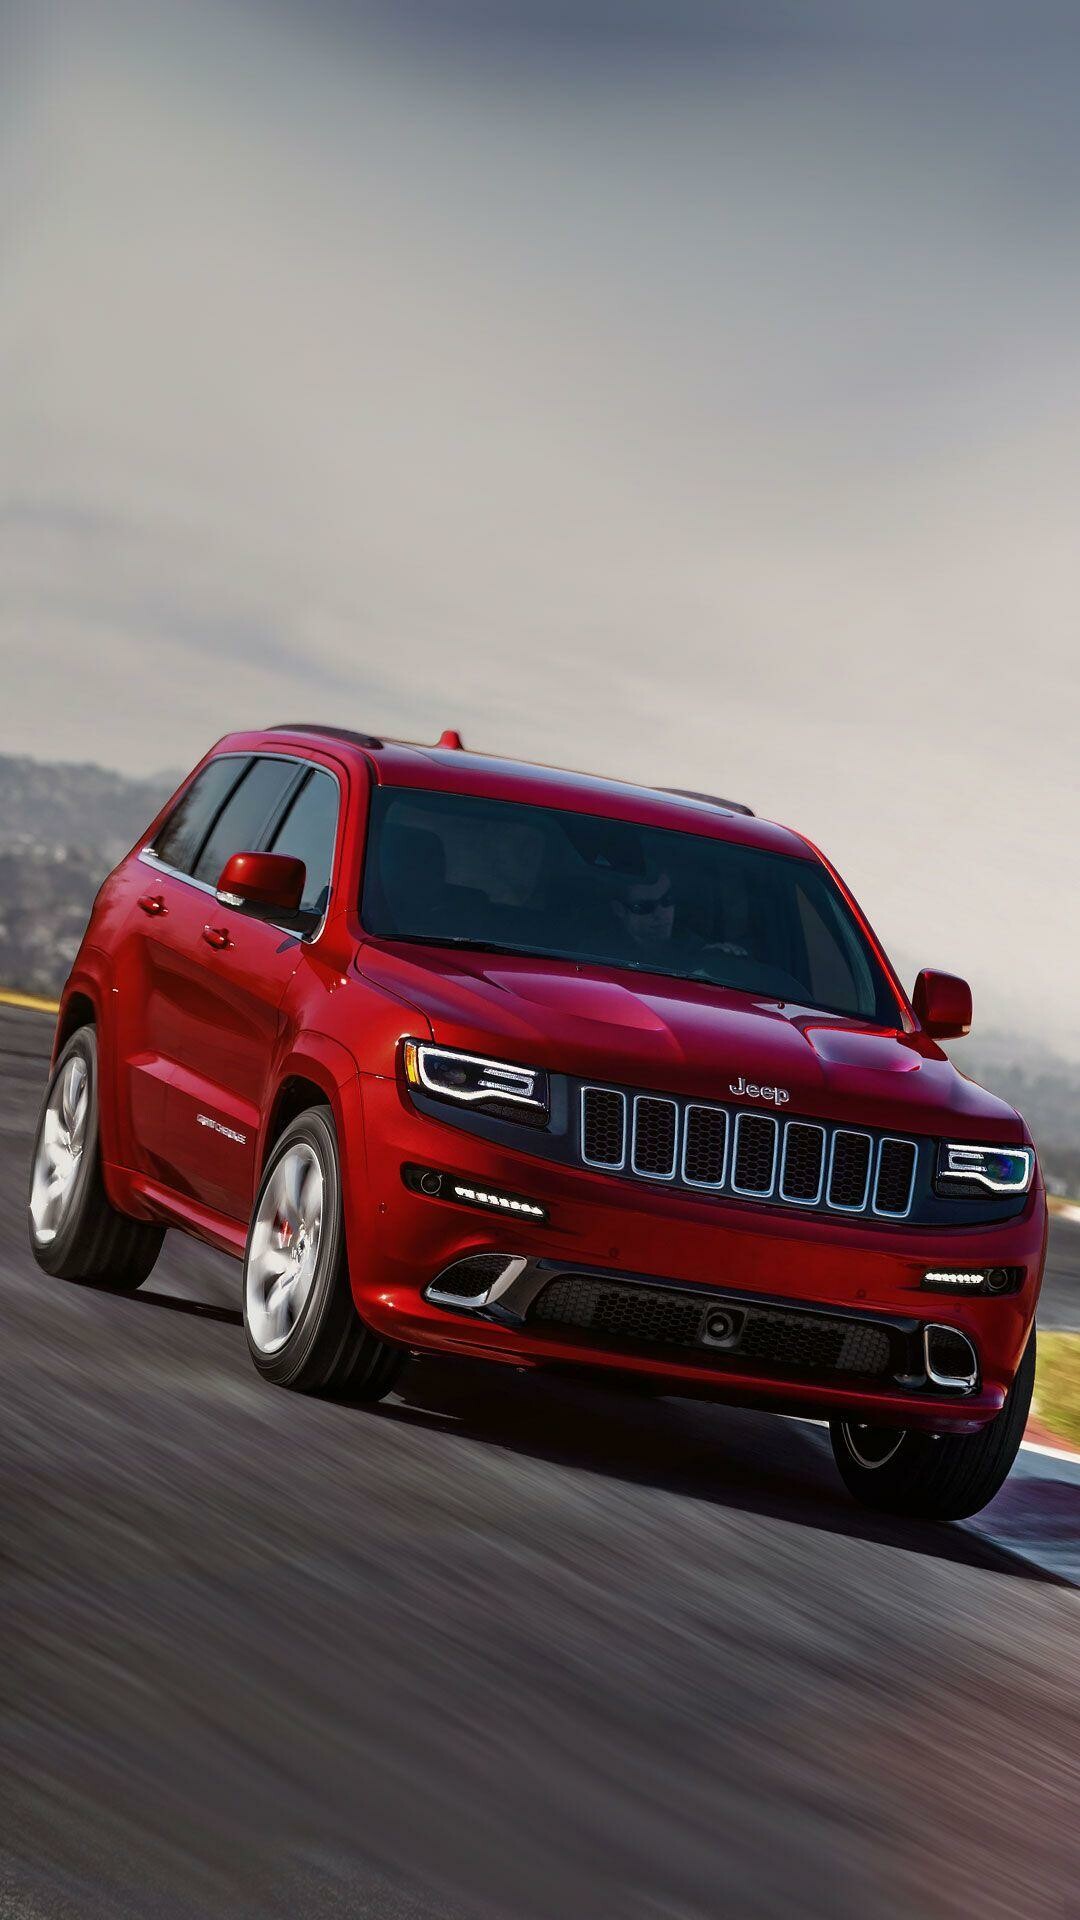 Jeep Grand Cherokee: The SRT, Stands for 'street and racing technology,'  A four-by-four model. 1080x1920 Full HD Background.